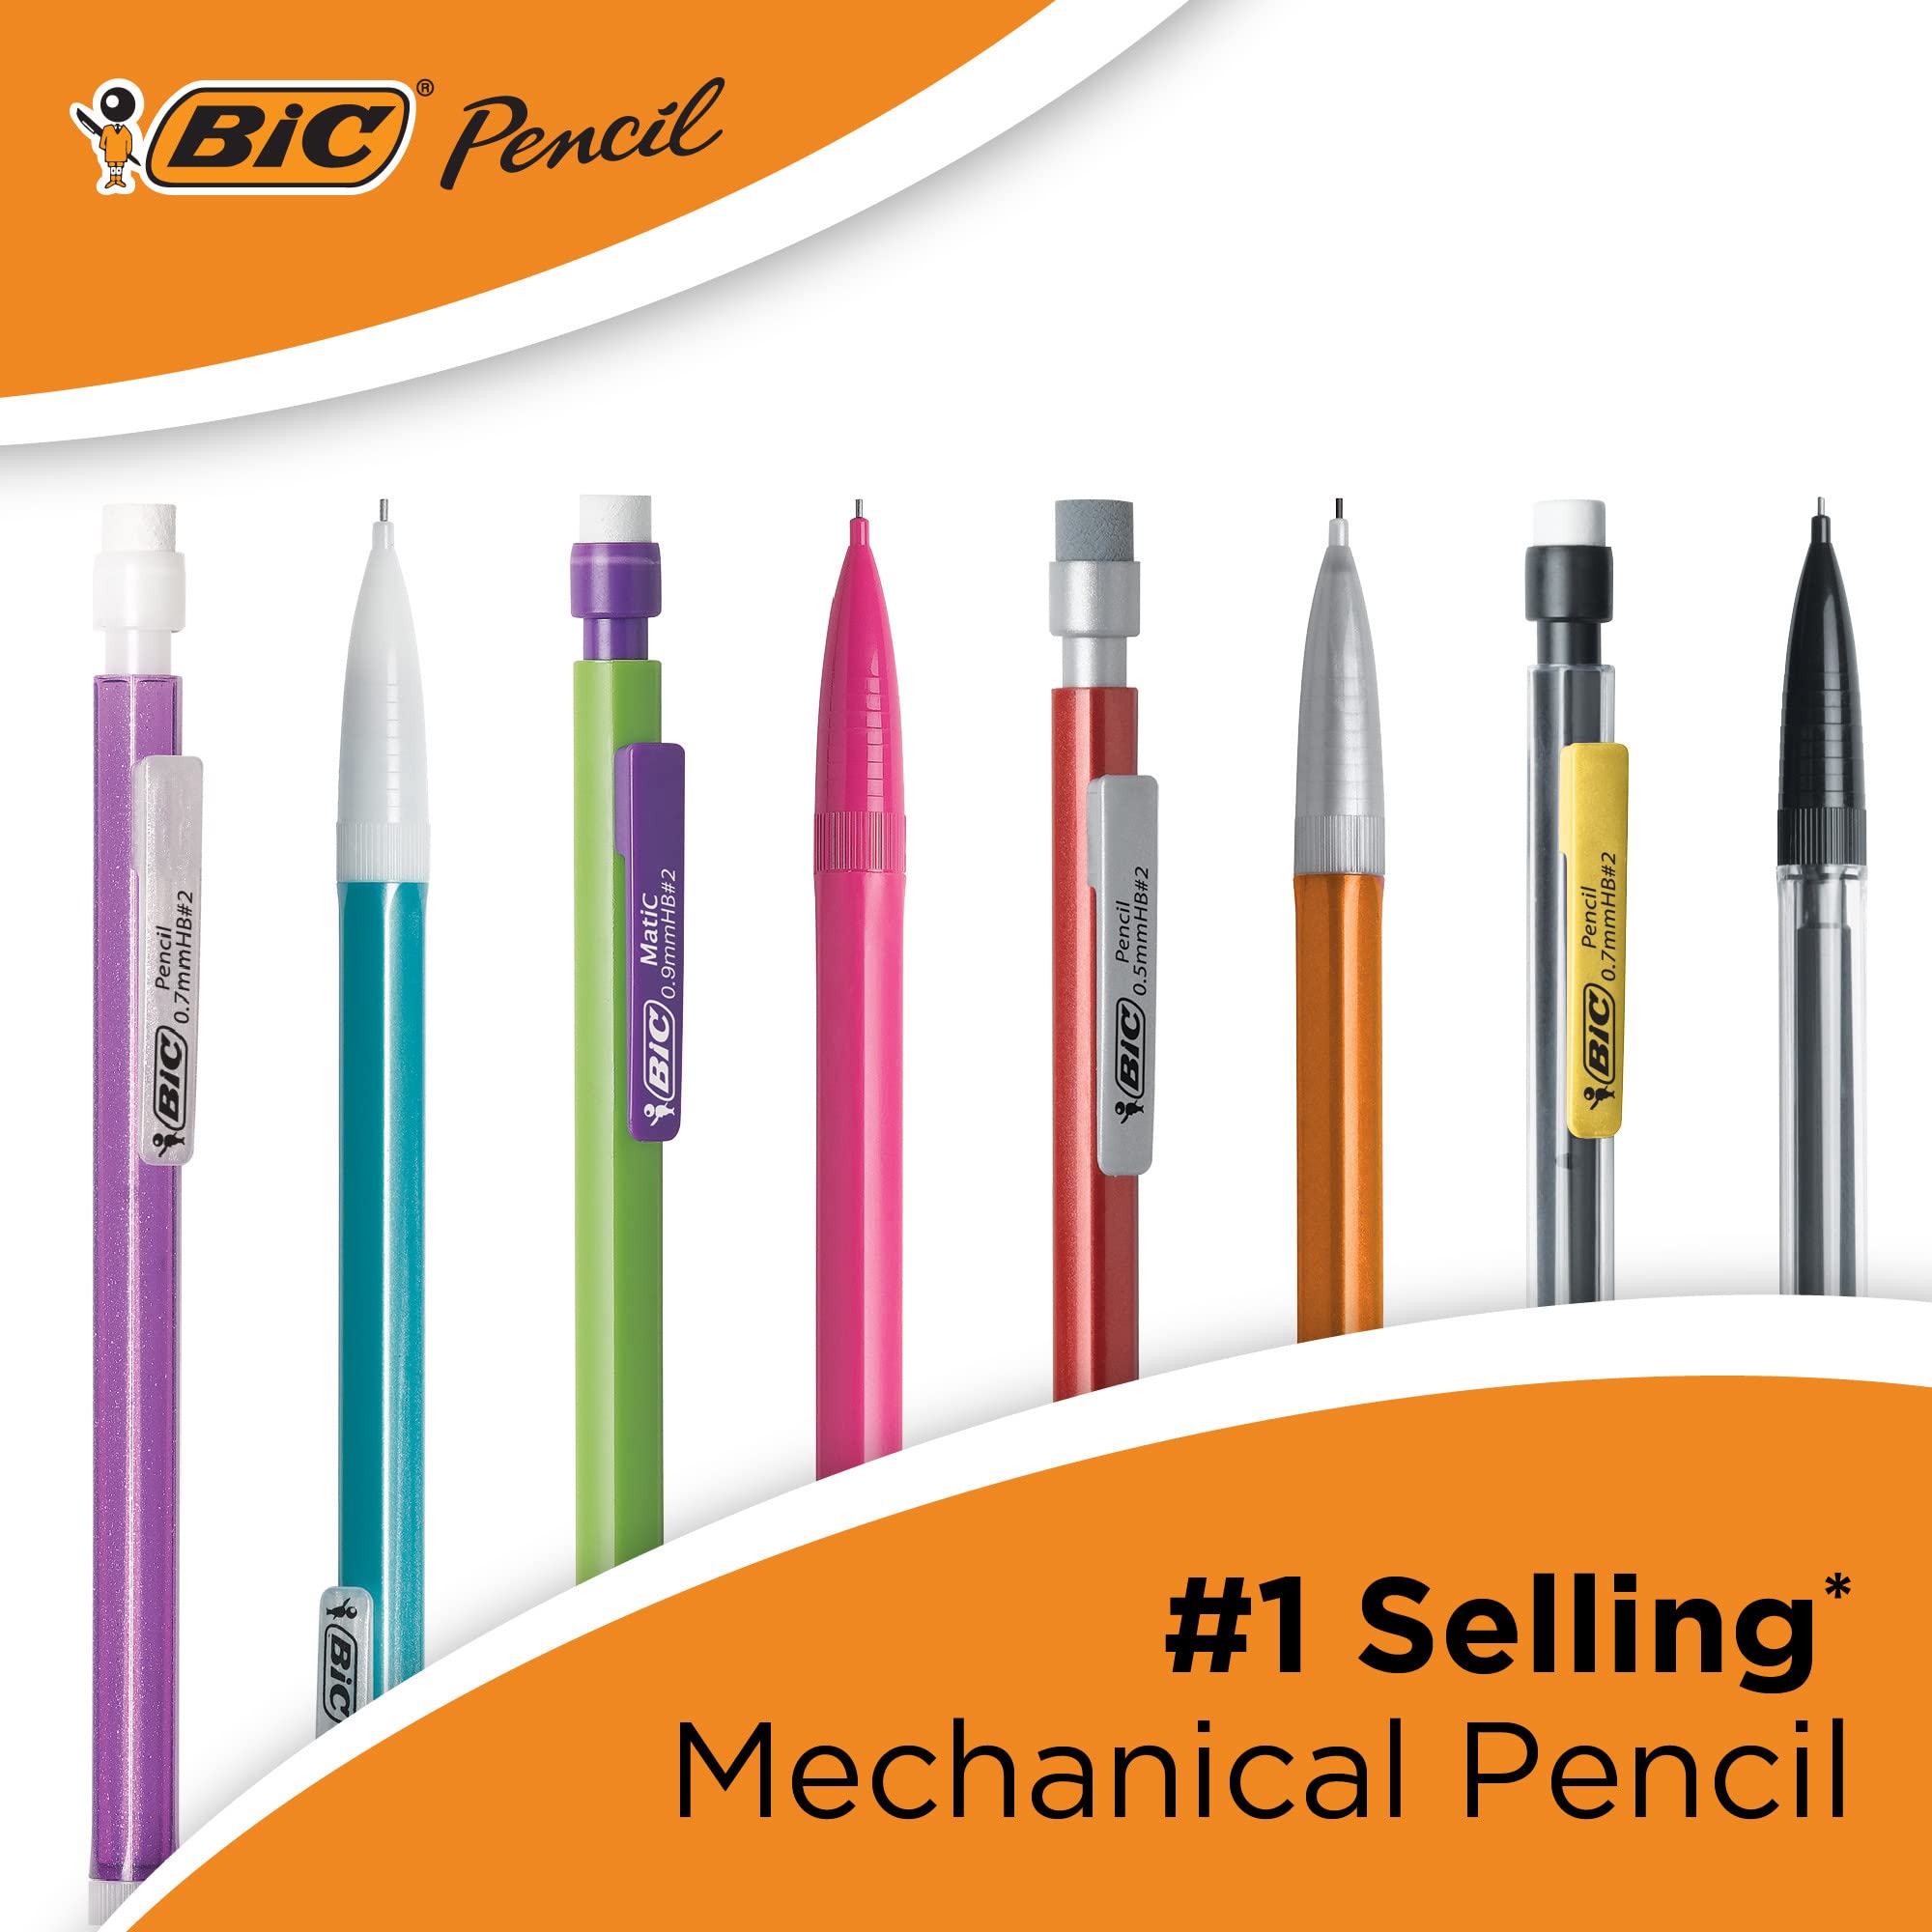 BIC Xtra-Sparkle Mechanical Pencil, Medium Point (0.7mm), Fun Design With Colorful Barrel, 15-Count